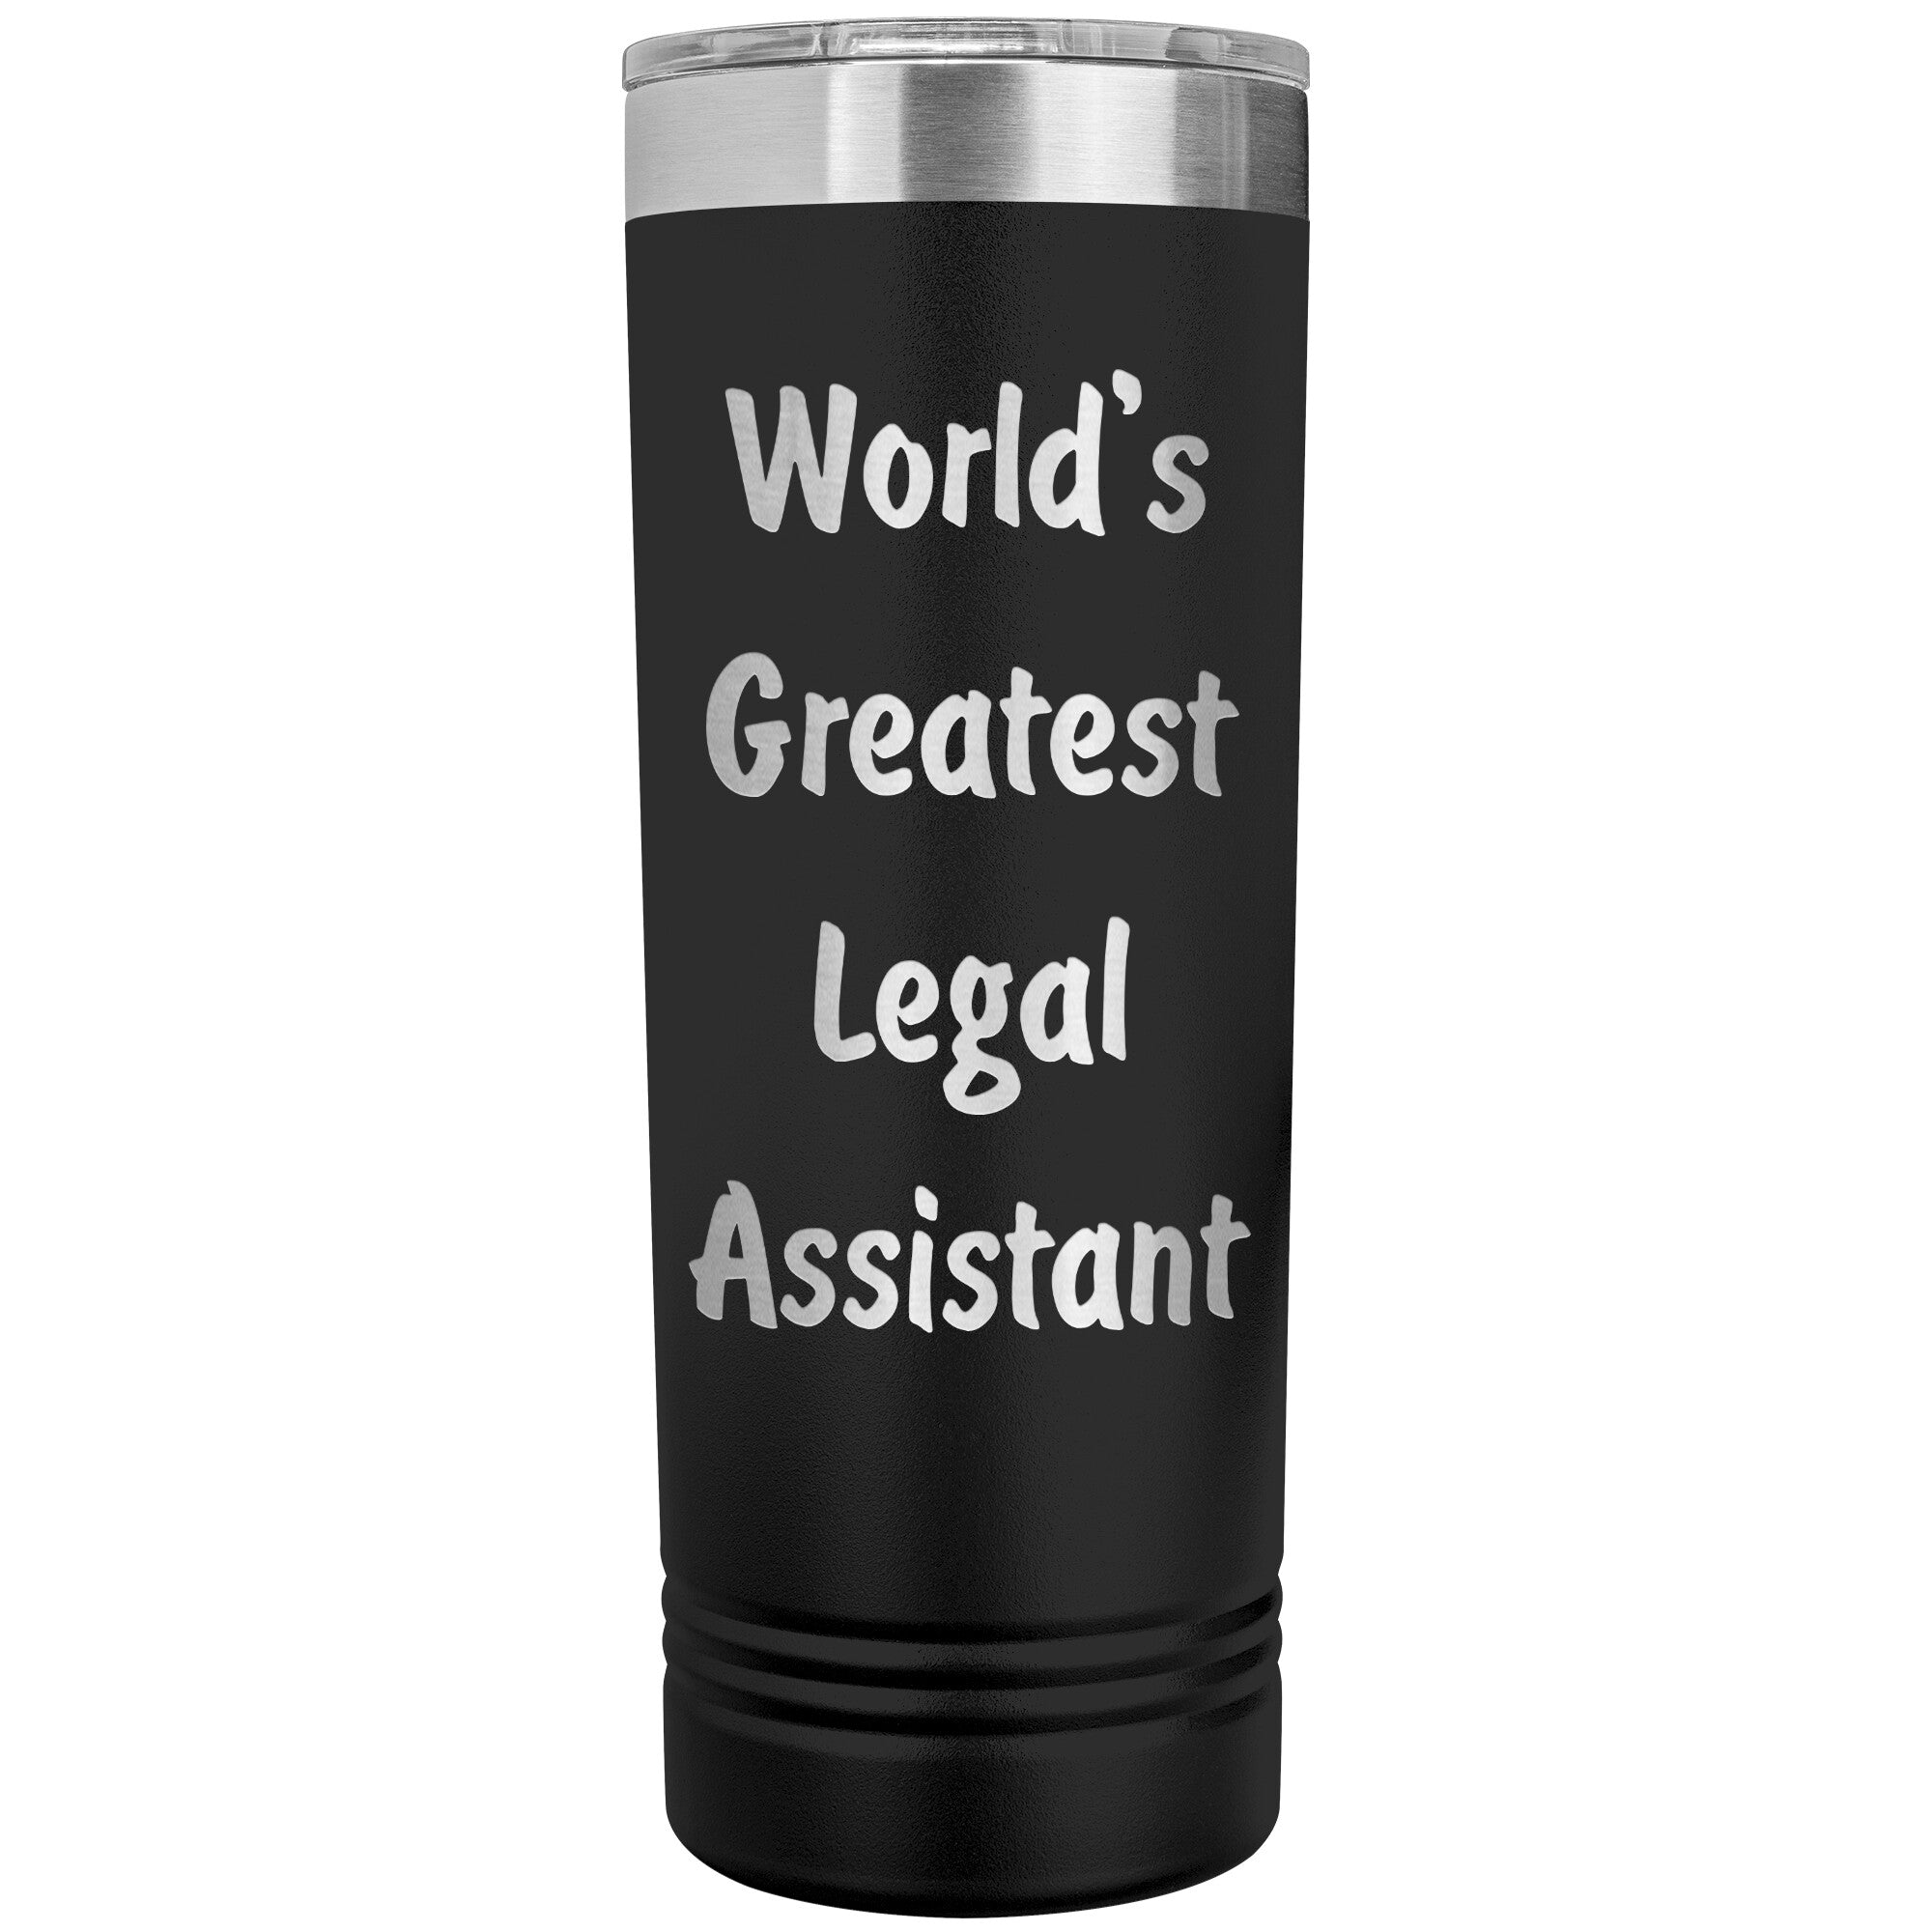 World's Greatest Legal Assistant - 22oz Insulated Skinny Tumbler